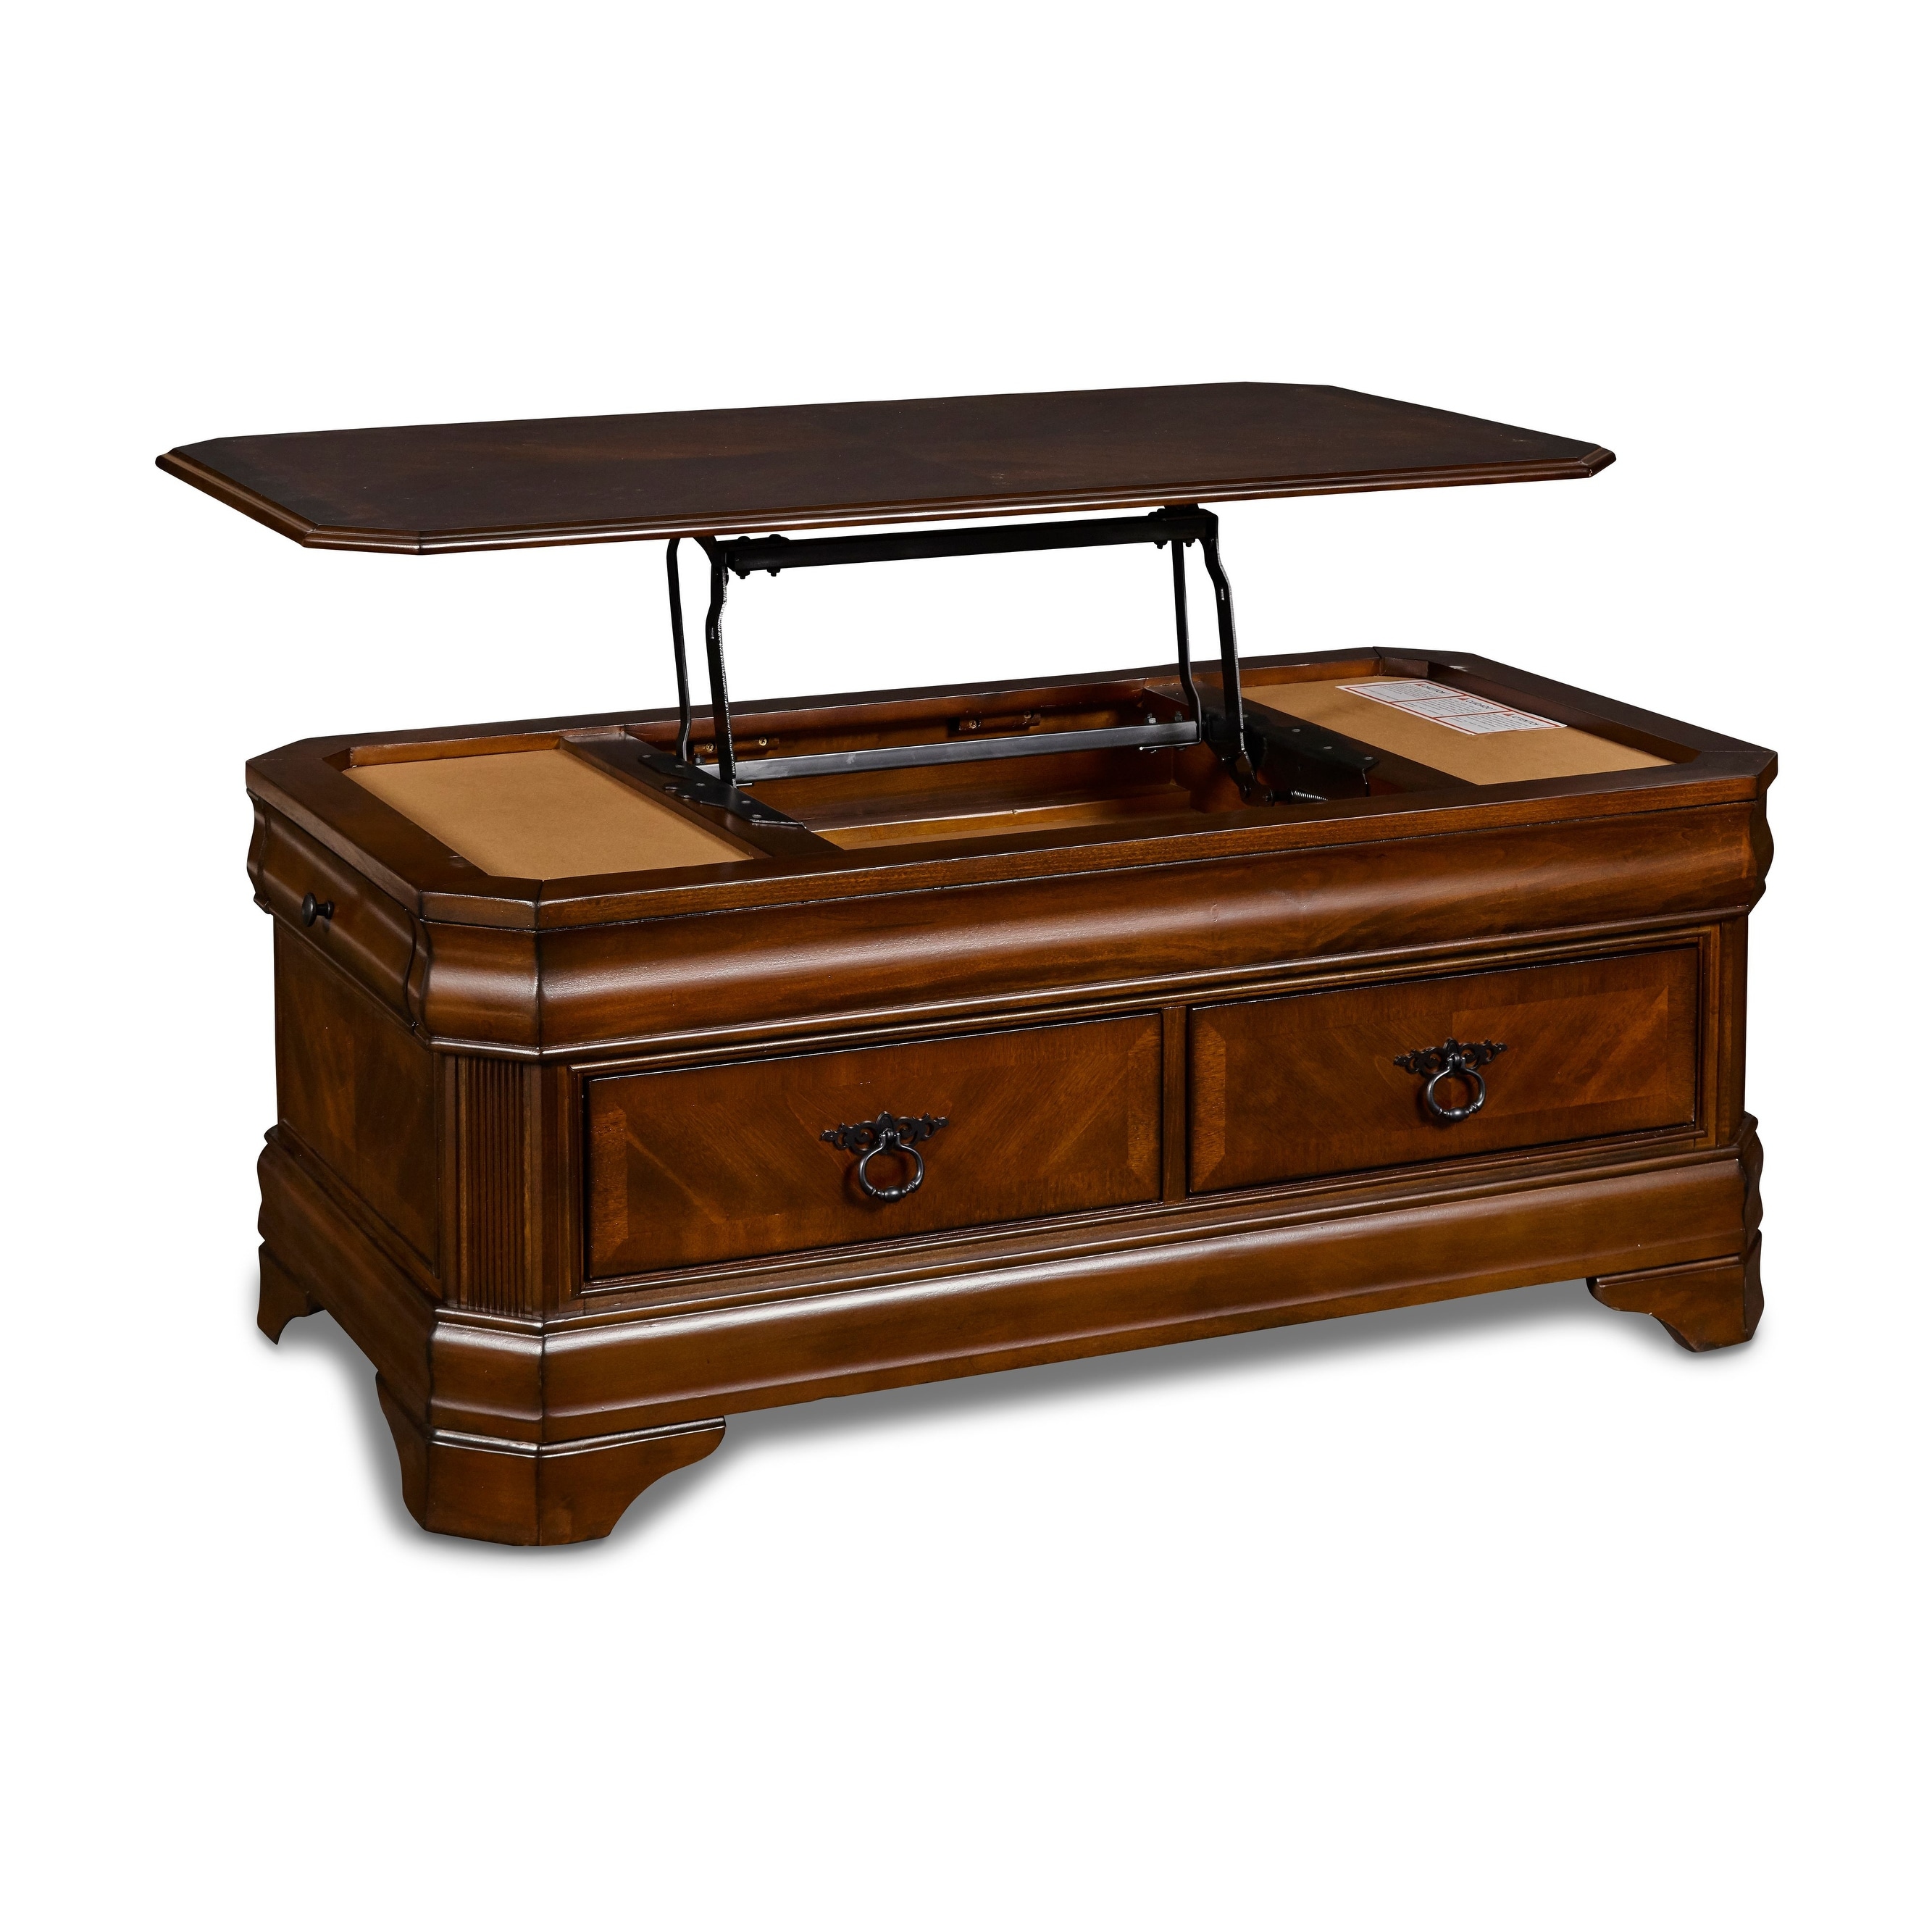 New Classic Furniture Sheridan Lift Top Cocktail Table with Storage